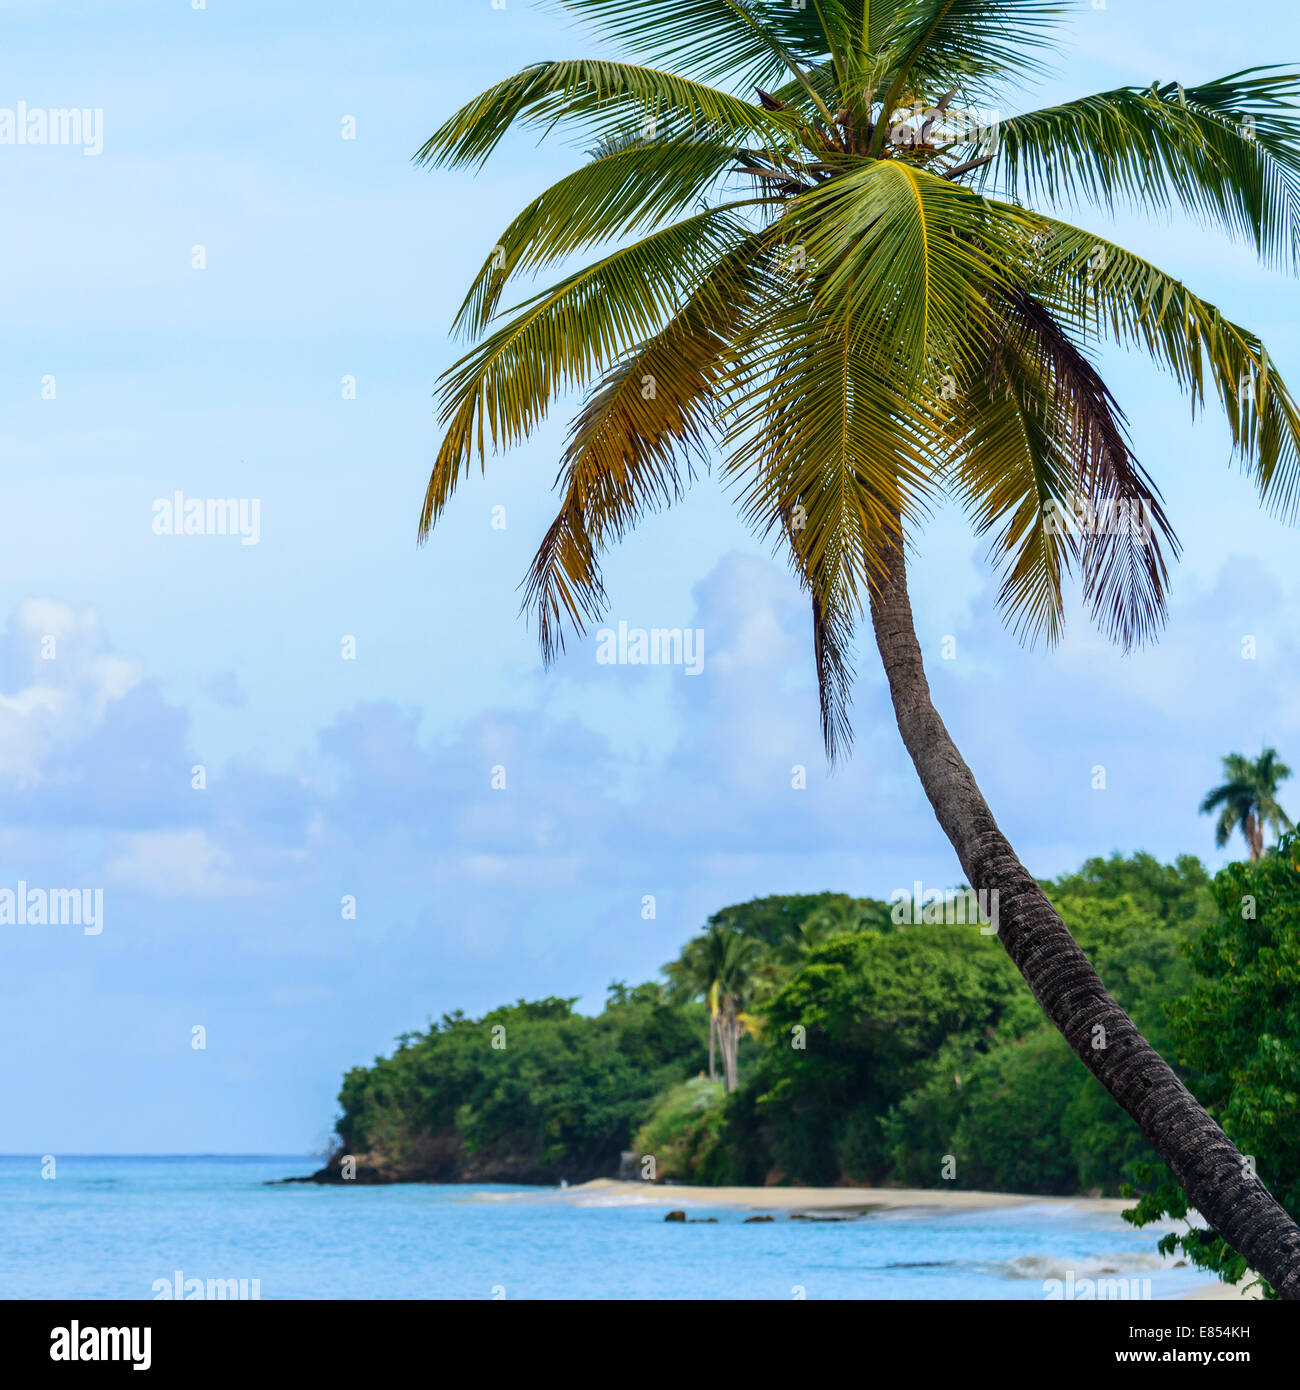 A coconut palm is featured in this image, with the Caribbean sea and then east end of St. Croix shoreline in the background. Stock Photo